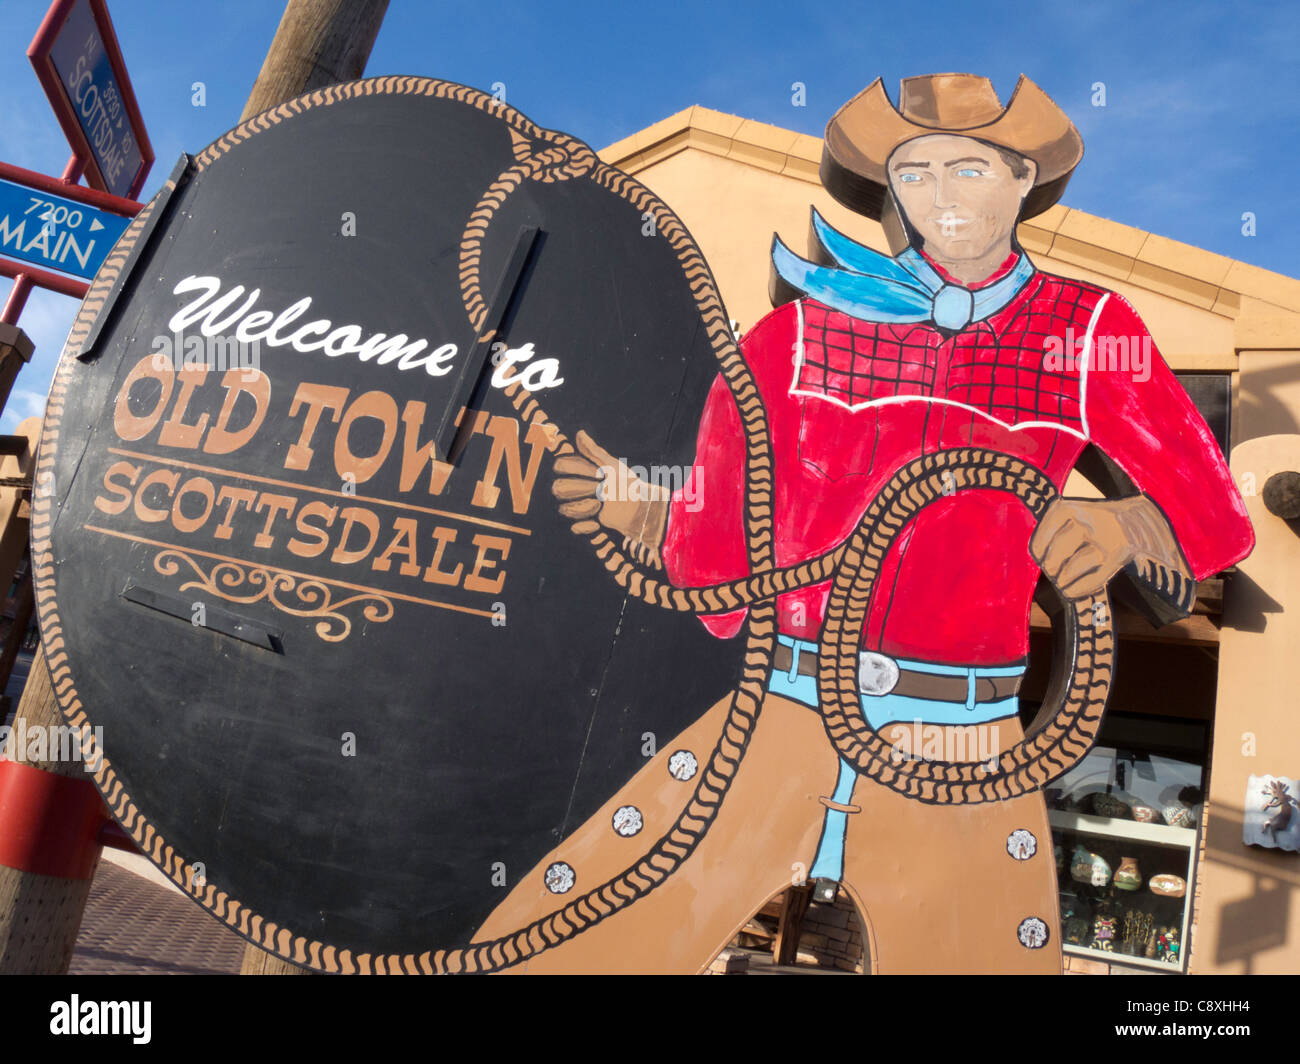 The cowboy with lasso greets visitors to Scottsdale, Arizona Stock Photo